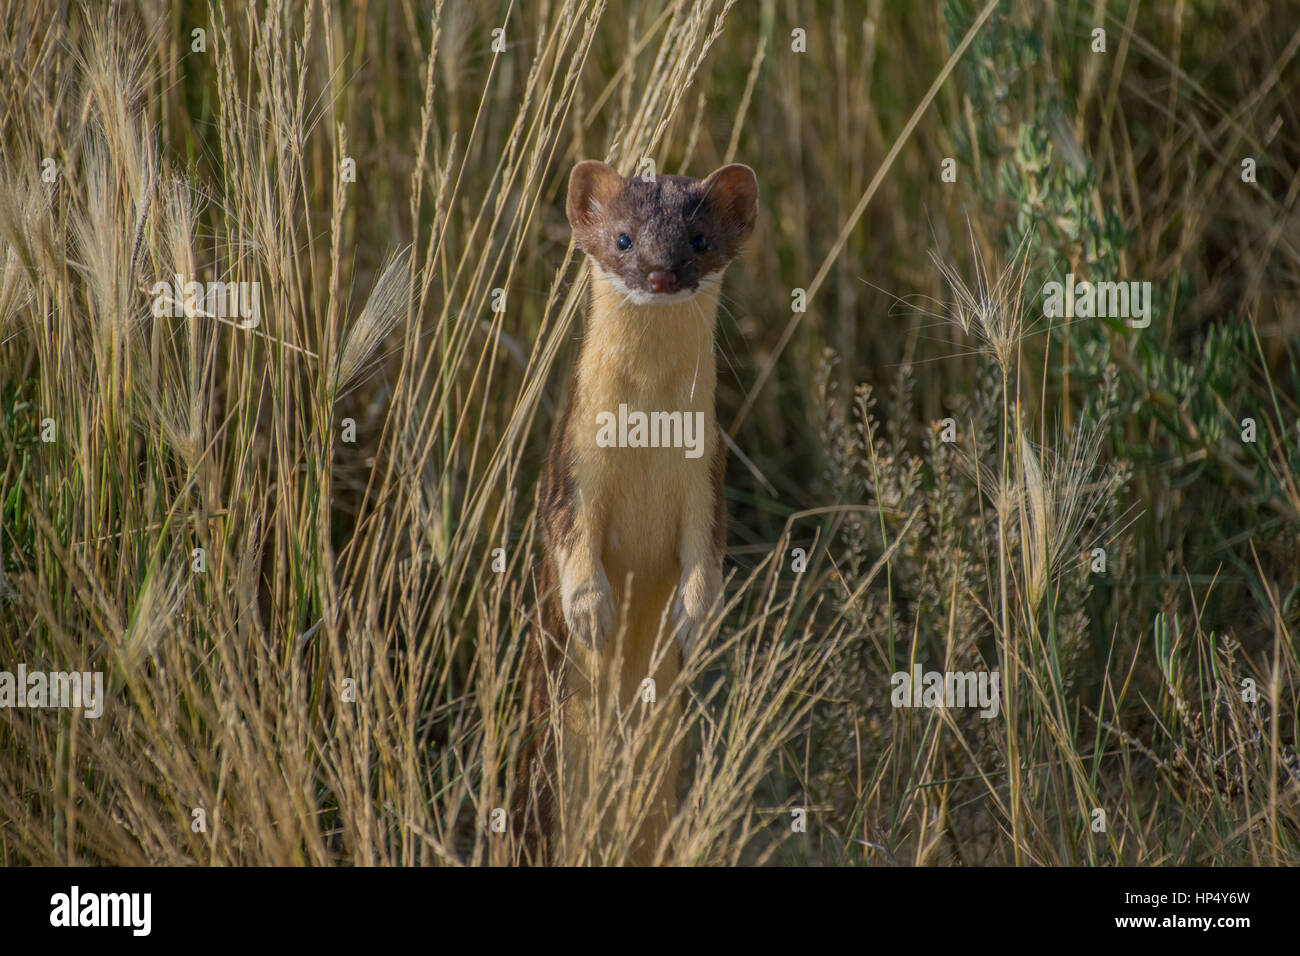 An Adorable Stoat on Hind Legs Observing from the Grass Stock Photo